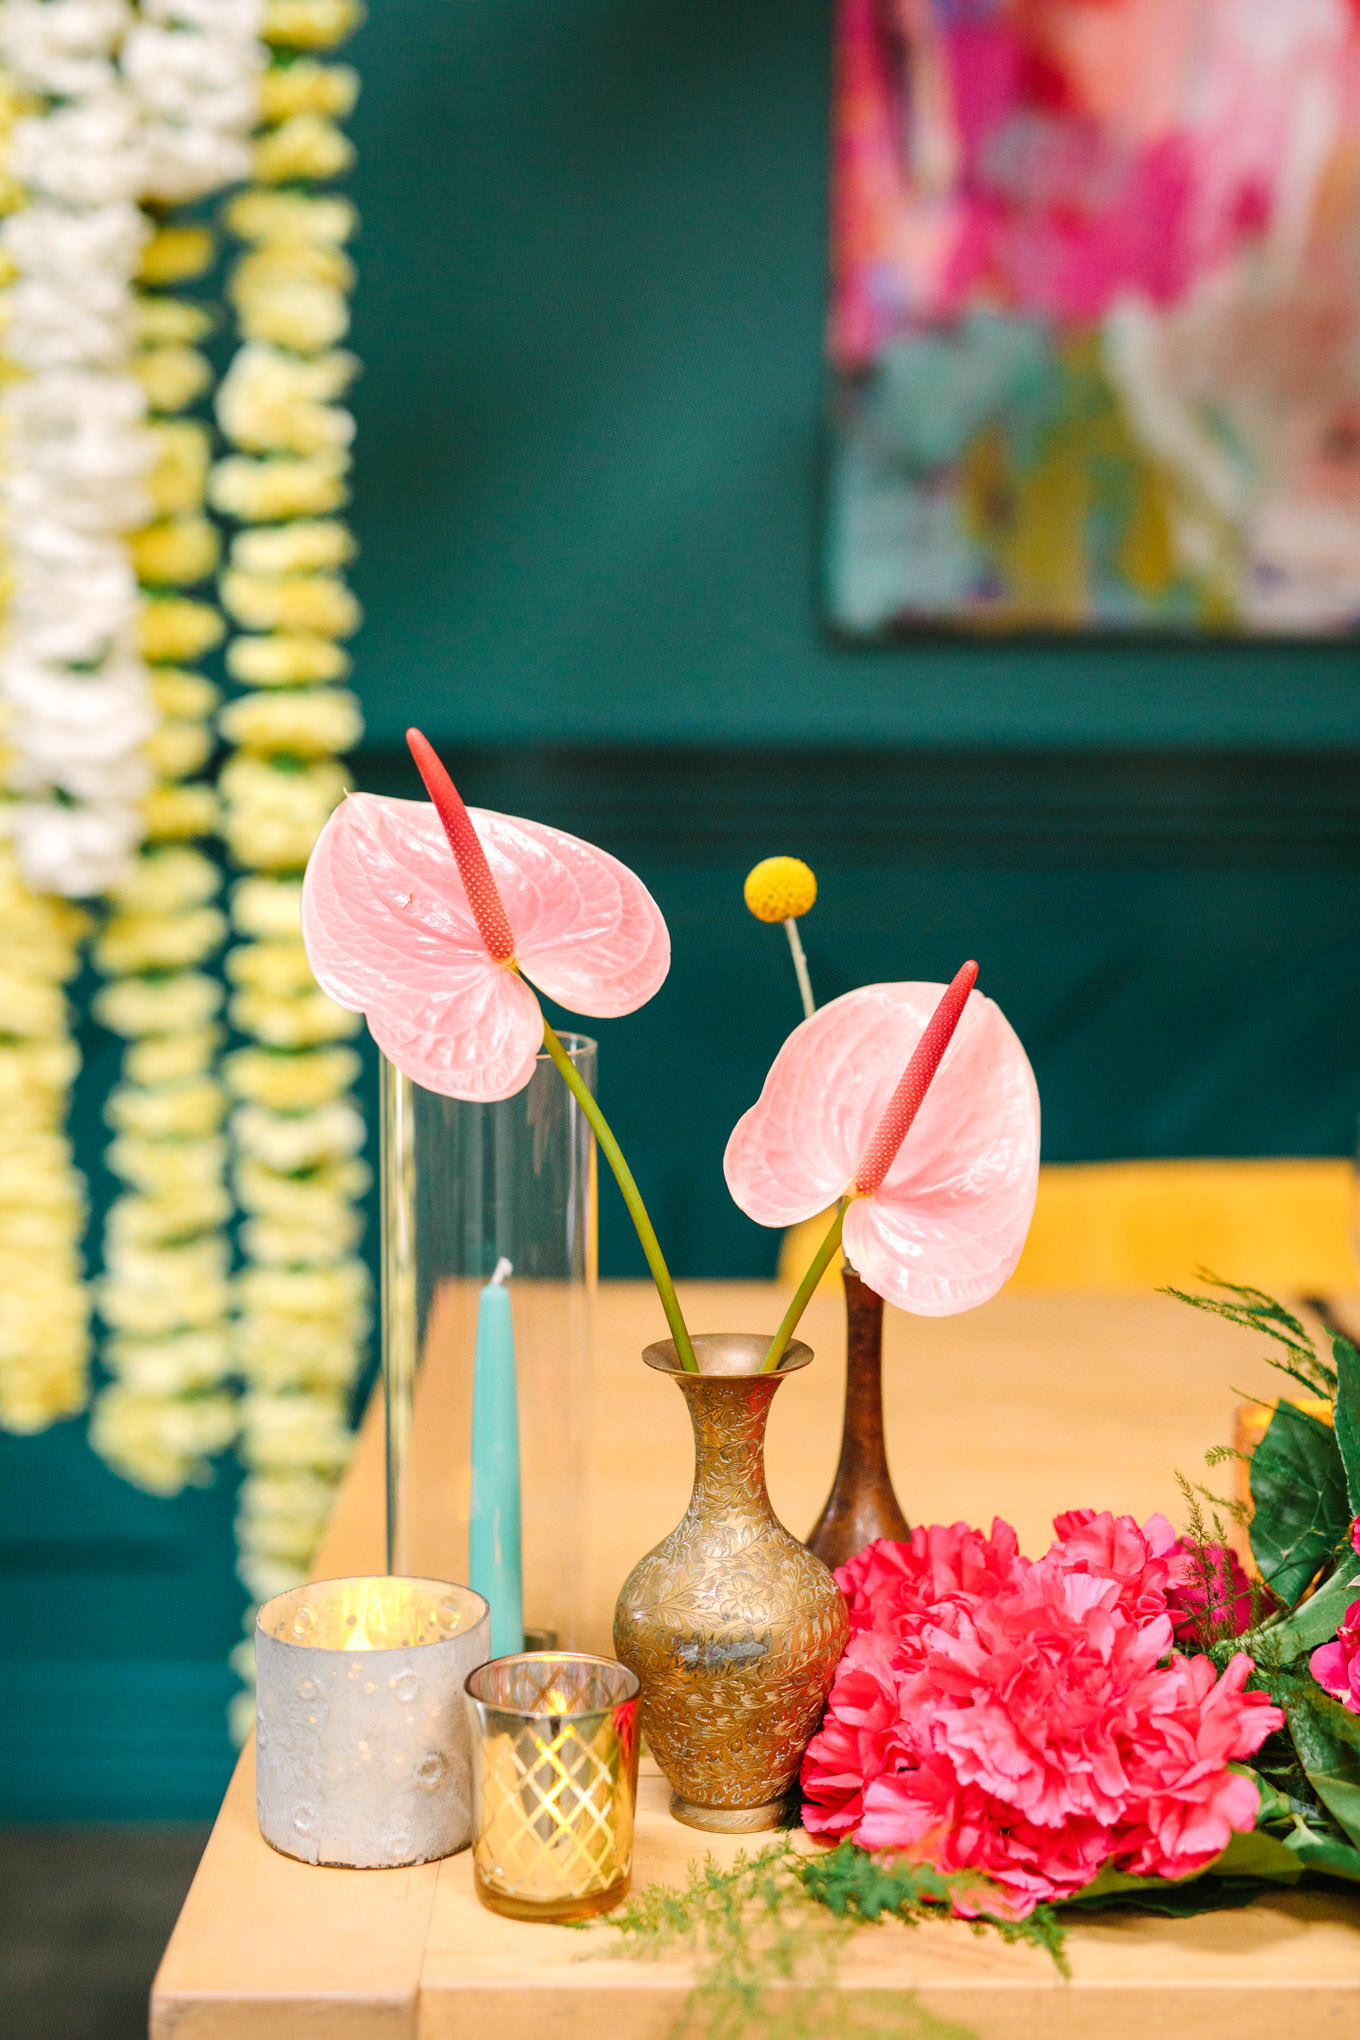 Tropical flower detail on sweetheart table. Two Disney artists create a unique and colorful Indian Fusion wedding at The Fig House Los Angeles, featured on Green Wedding Shoes. | Colorful and elevated wedding inspiration for fun-loving couples in Southern California | #indianwedding #indianfusionwedding #thefighouse #losangeleswedding   Source: Mary Costa Photography | Los Angeles